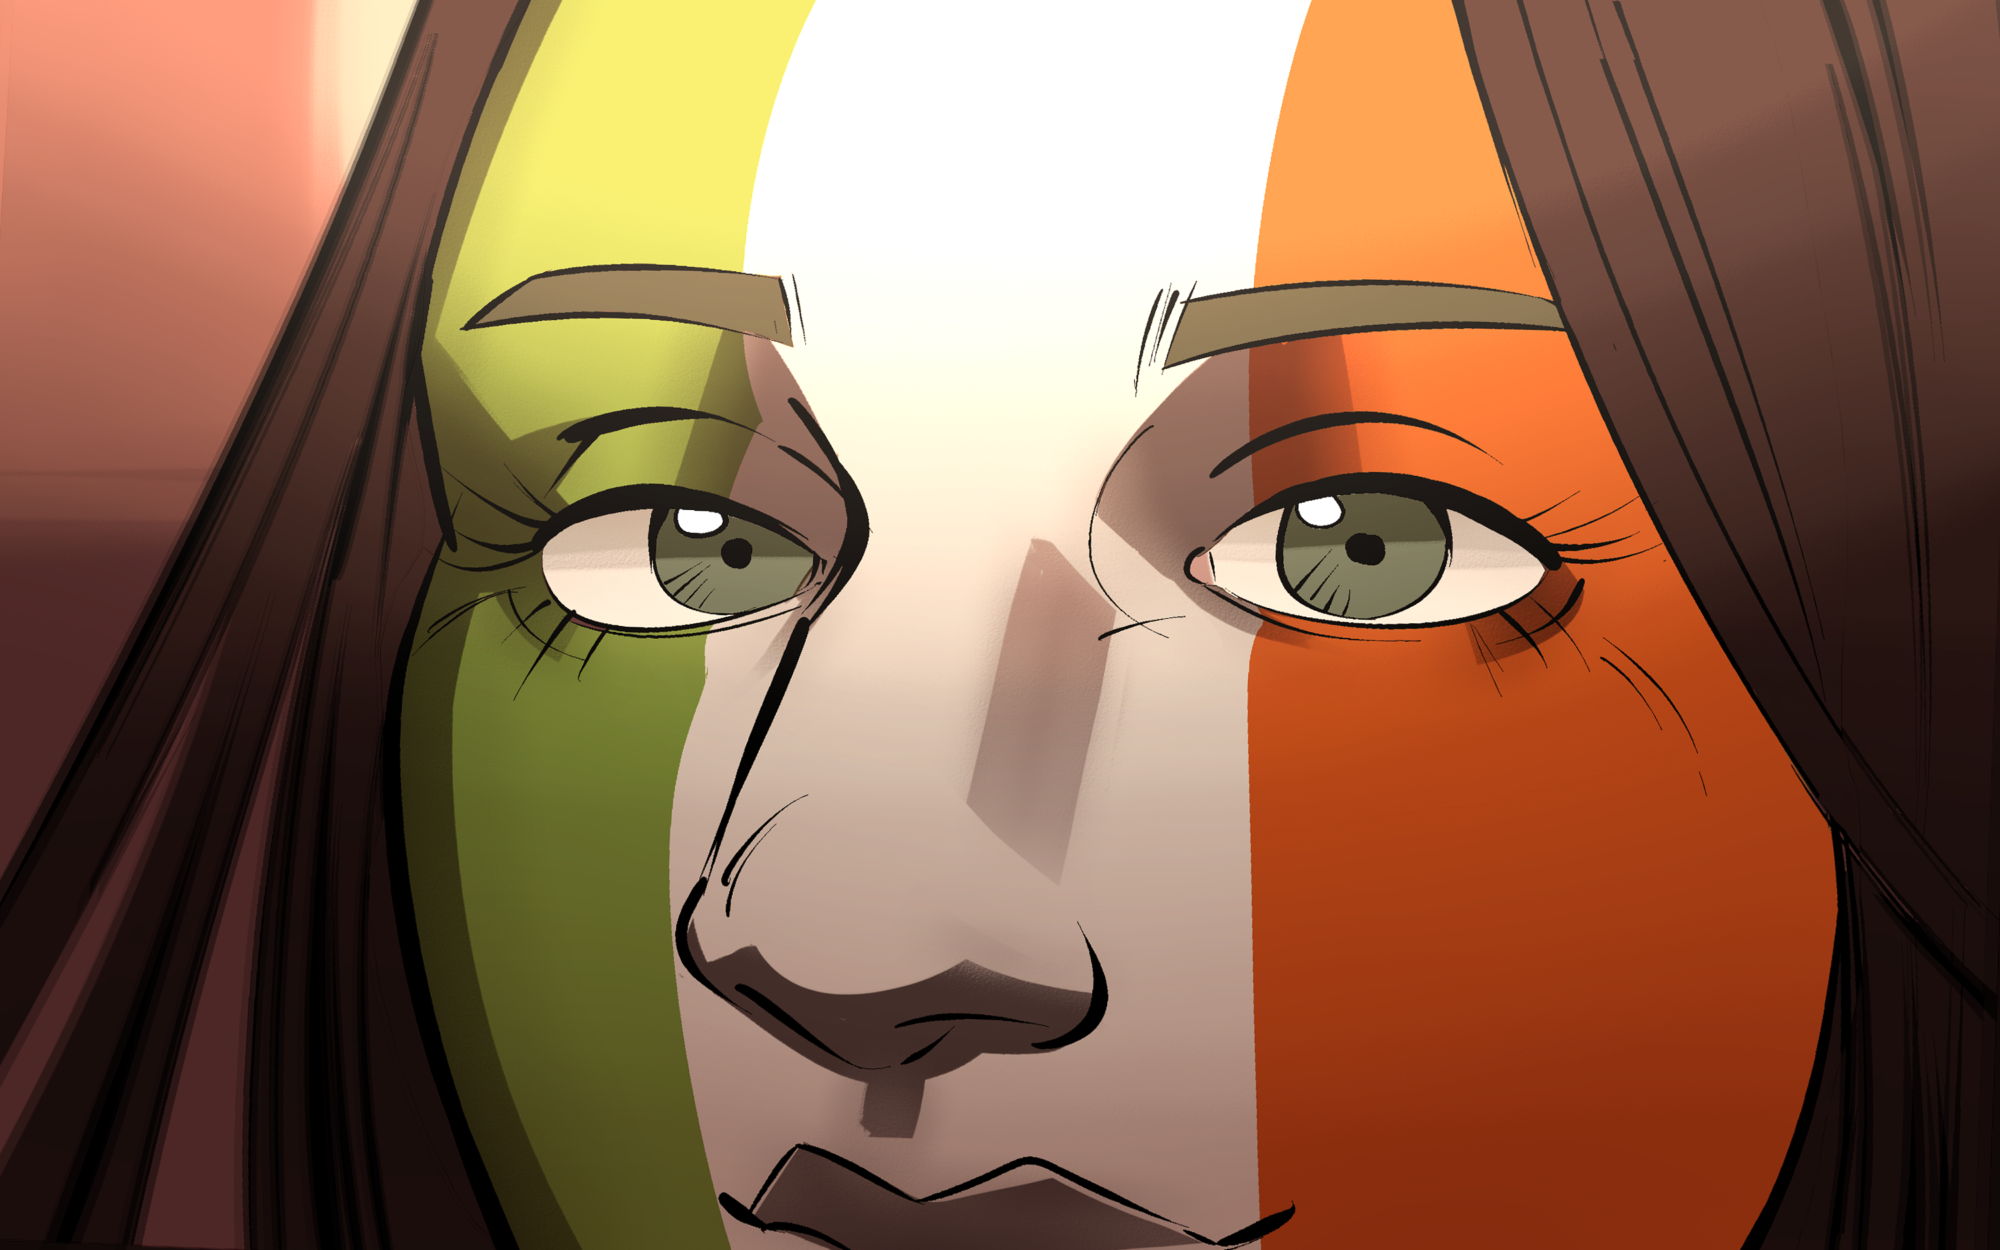 Close-up of a face painted in the tricolour Irish flag